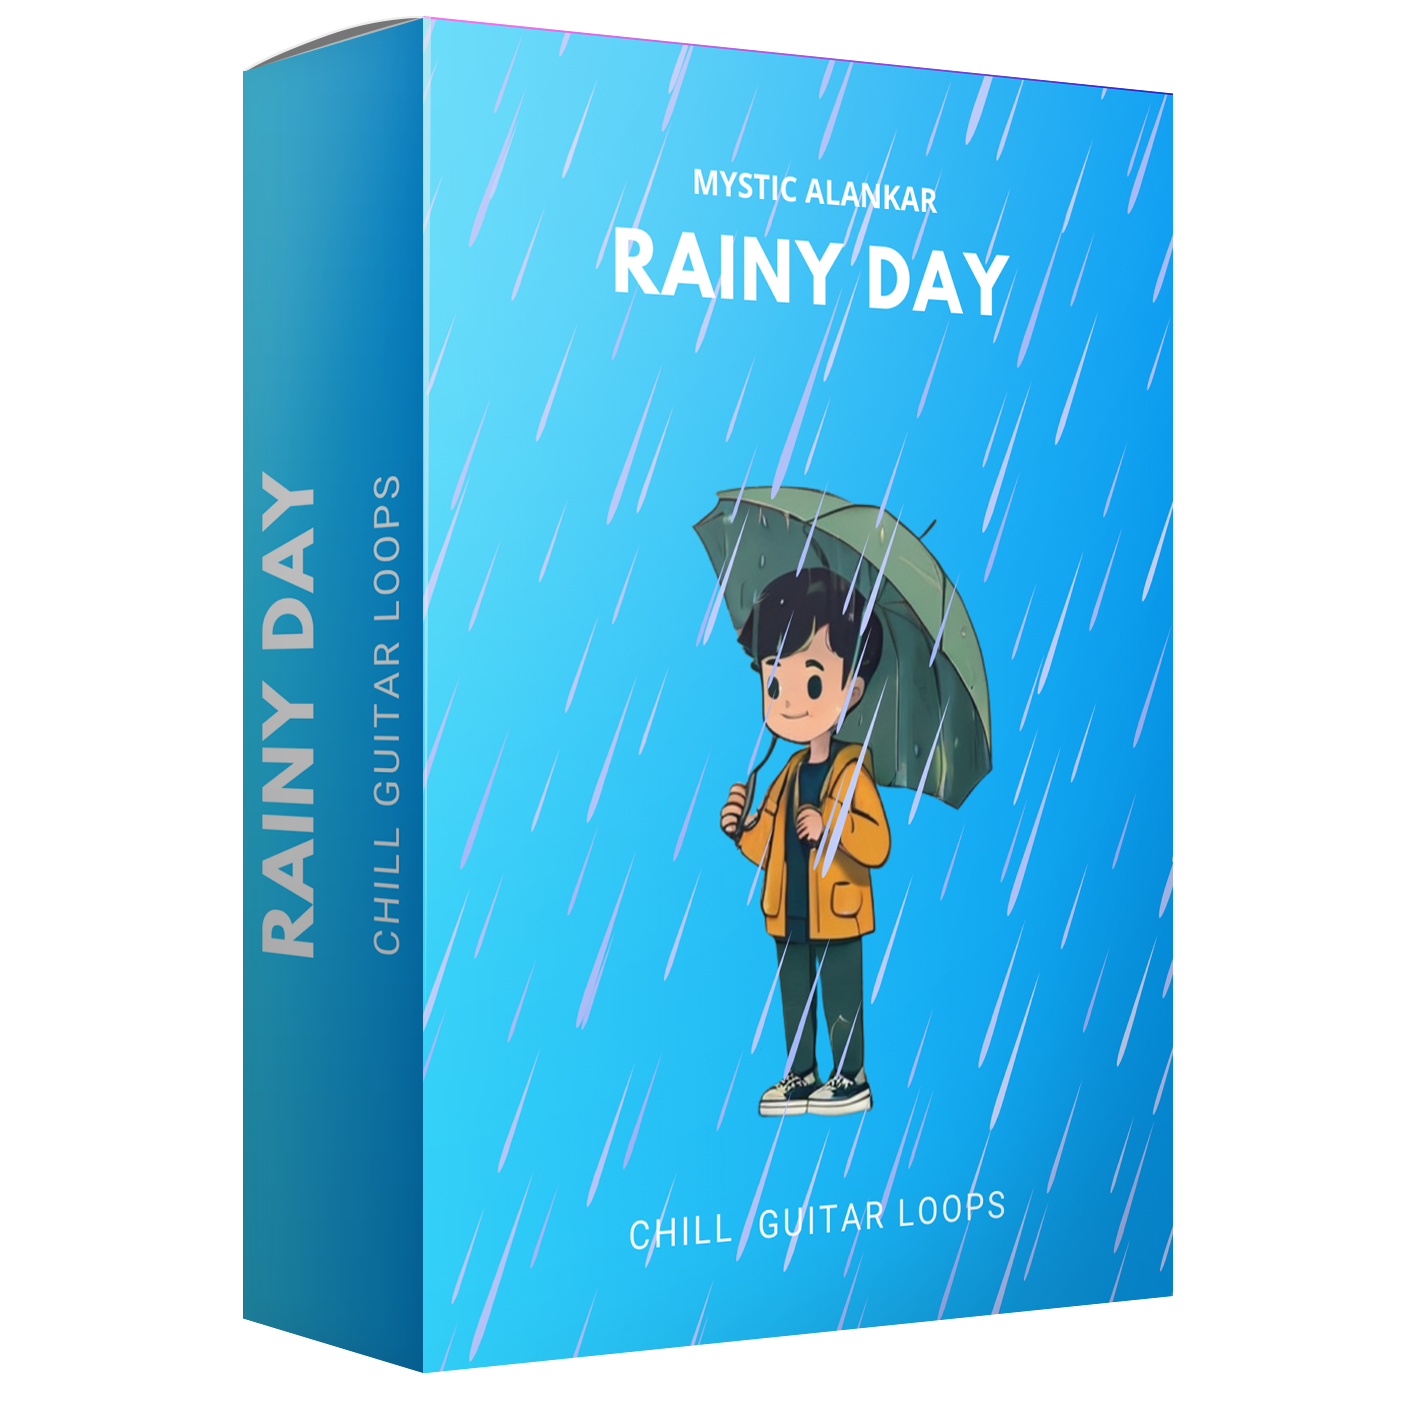 Rainy Day - Chill Guitar Loops